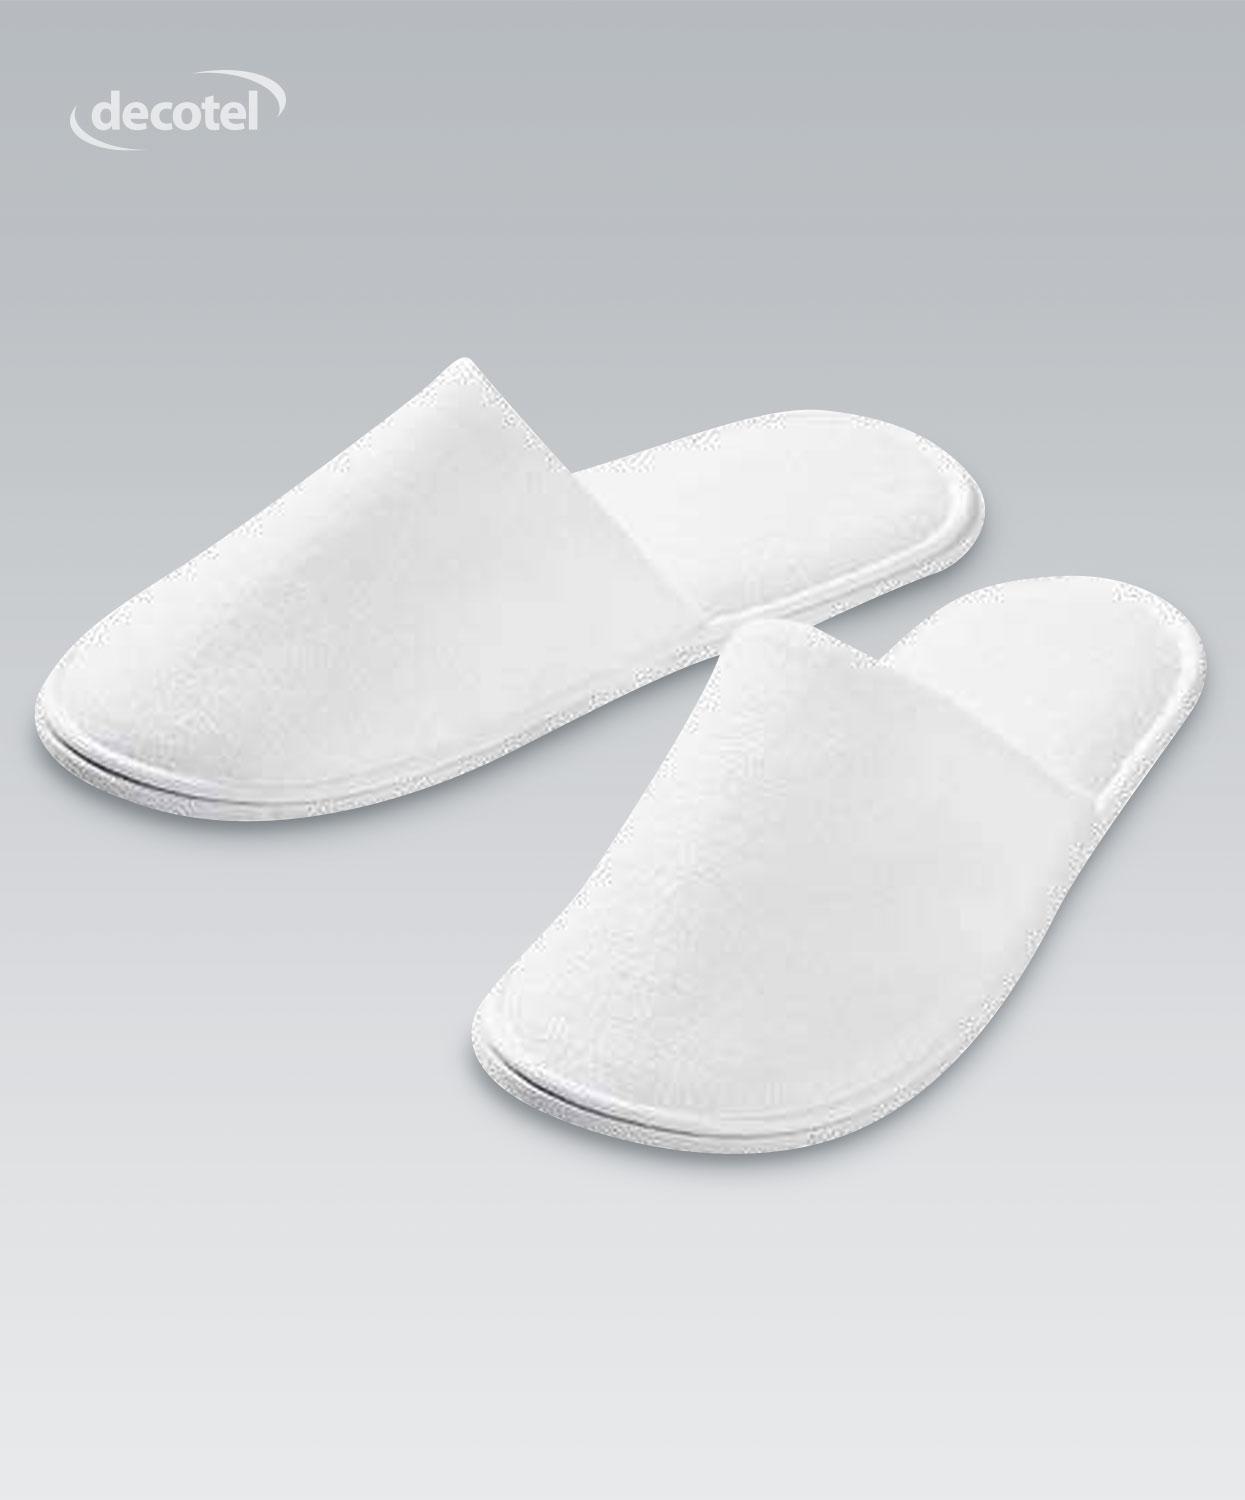 Beverly Hills closed toe slippers